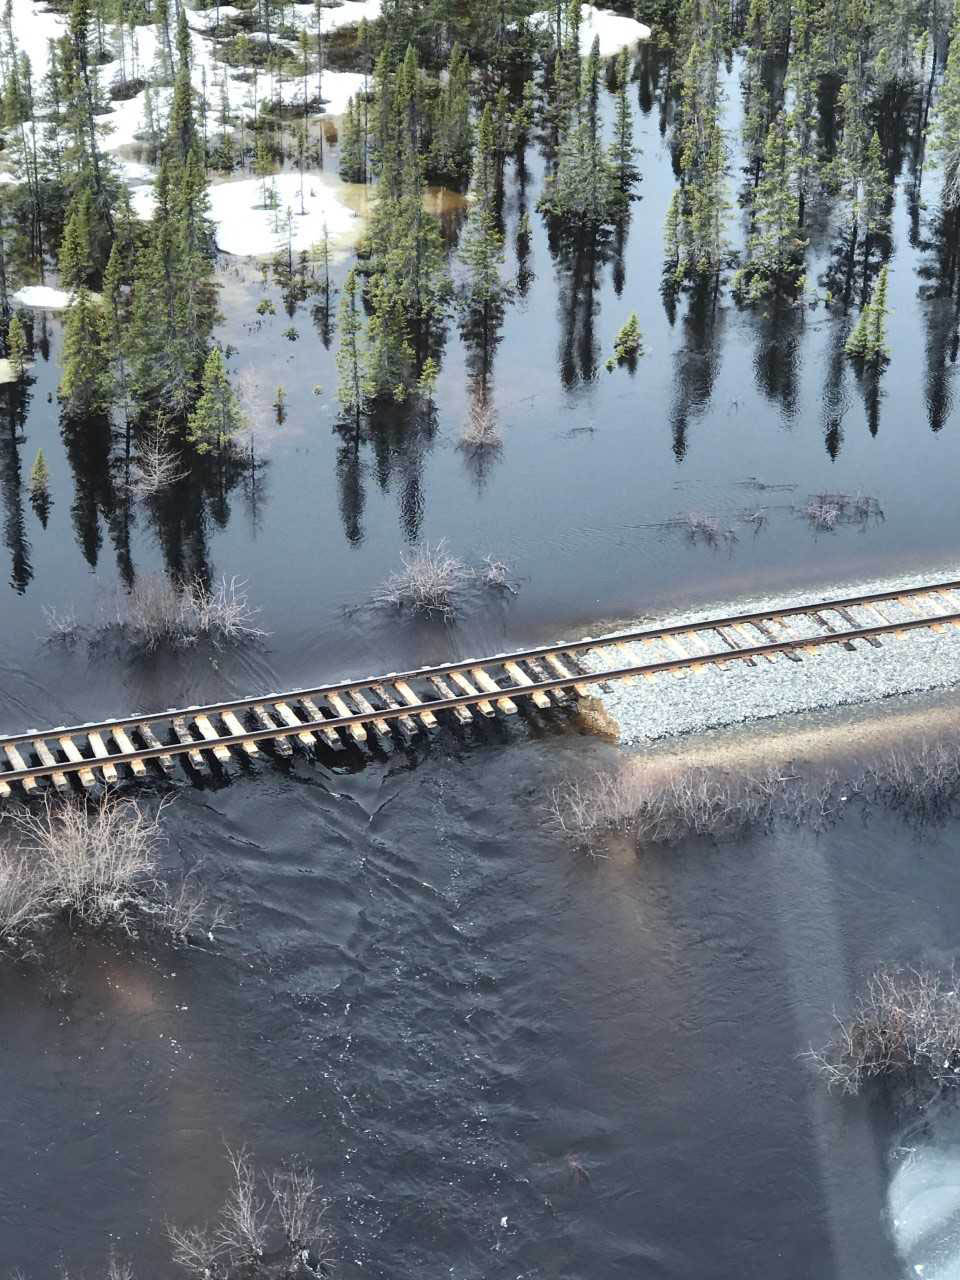 The Hudson Bay Railway damaged by floodwaters in 2017